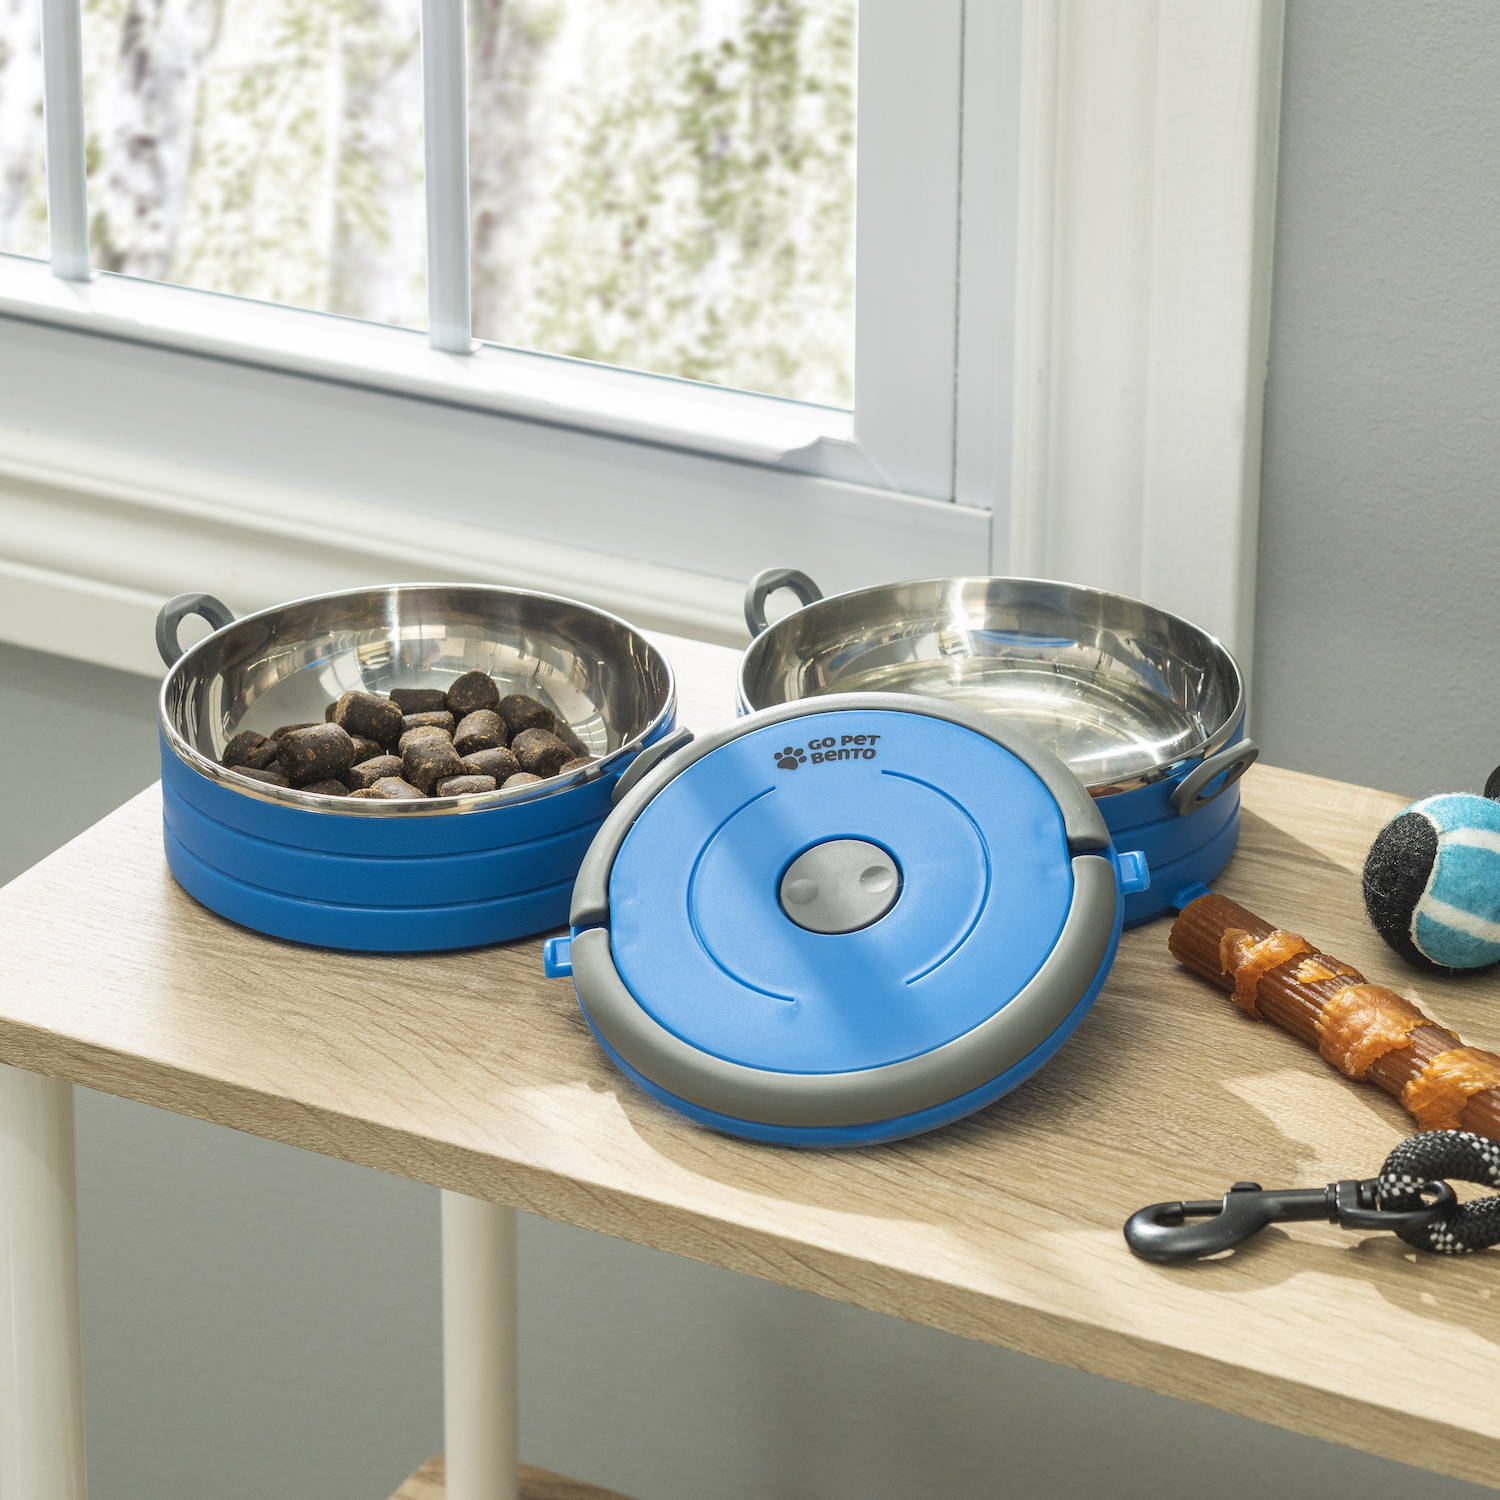 10 reasons you’ll love our new gear - a pet food and travel bowl